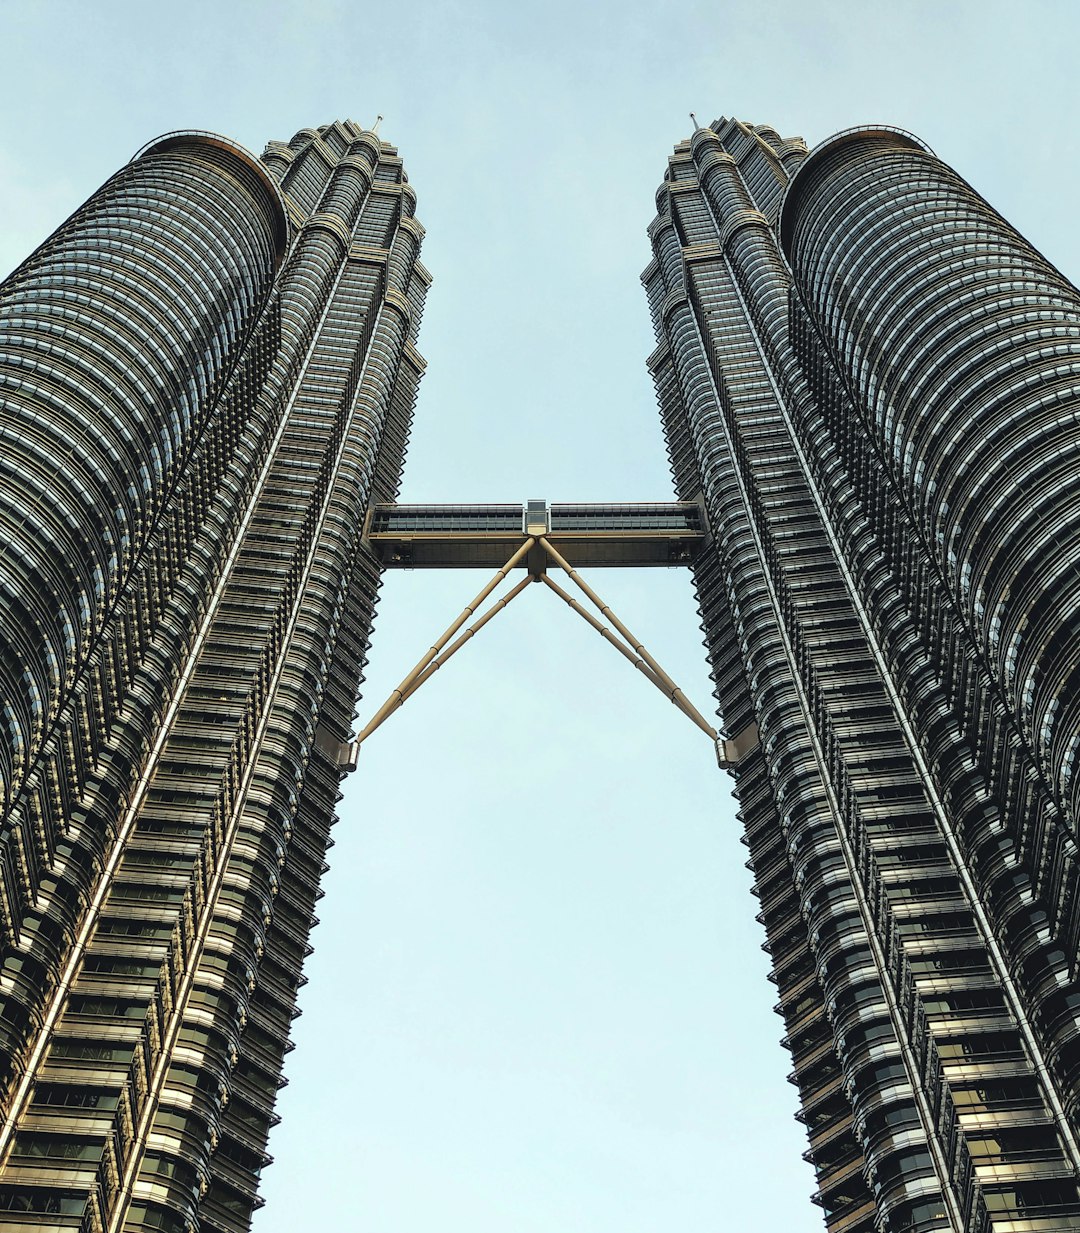 travelers stories about Landmark in Petronas Twin Towers, Malaysia